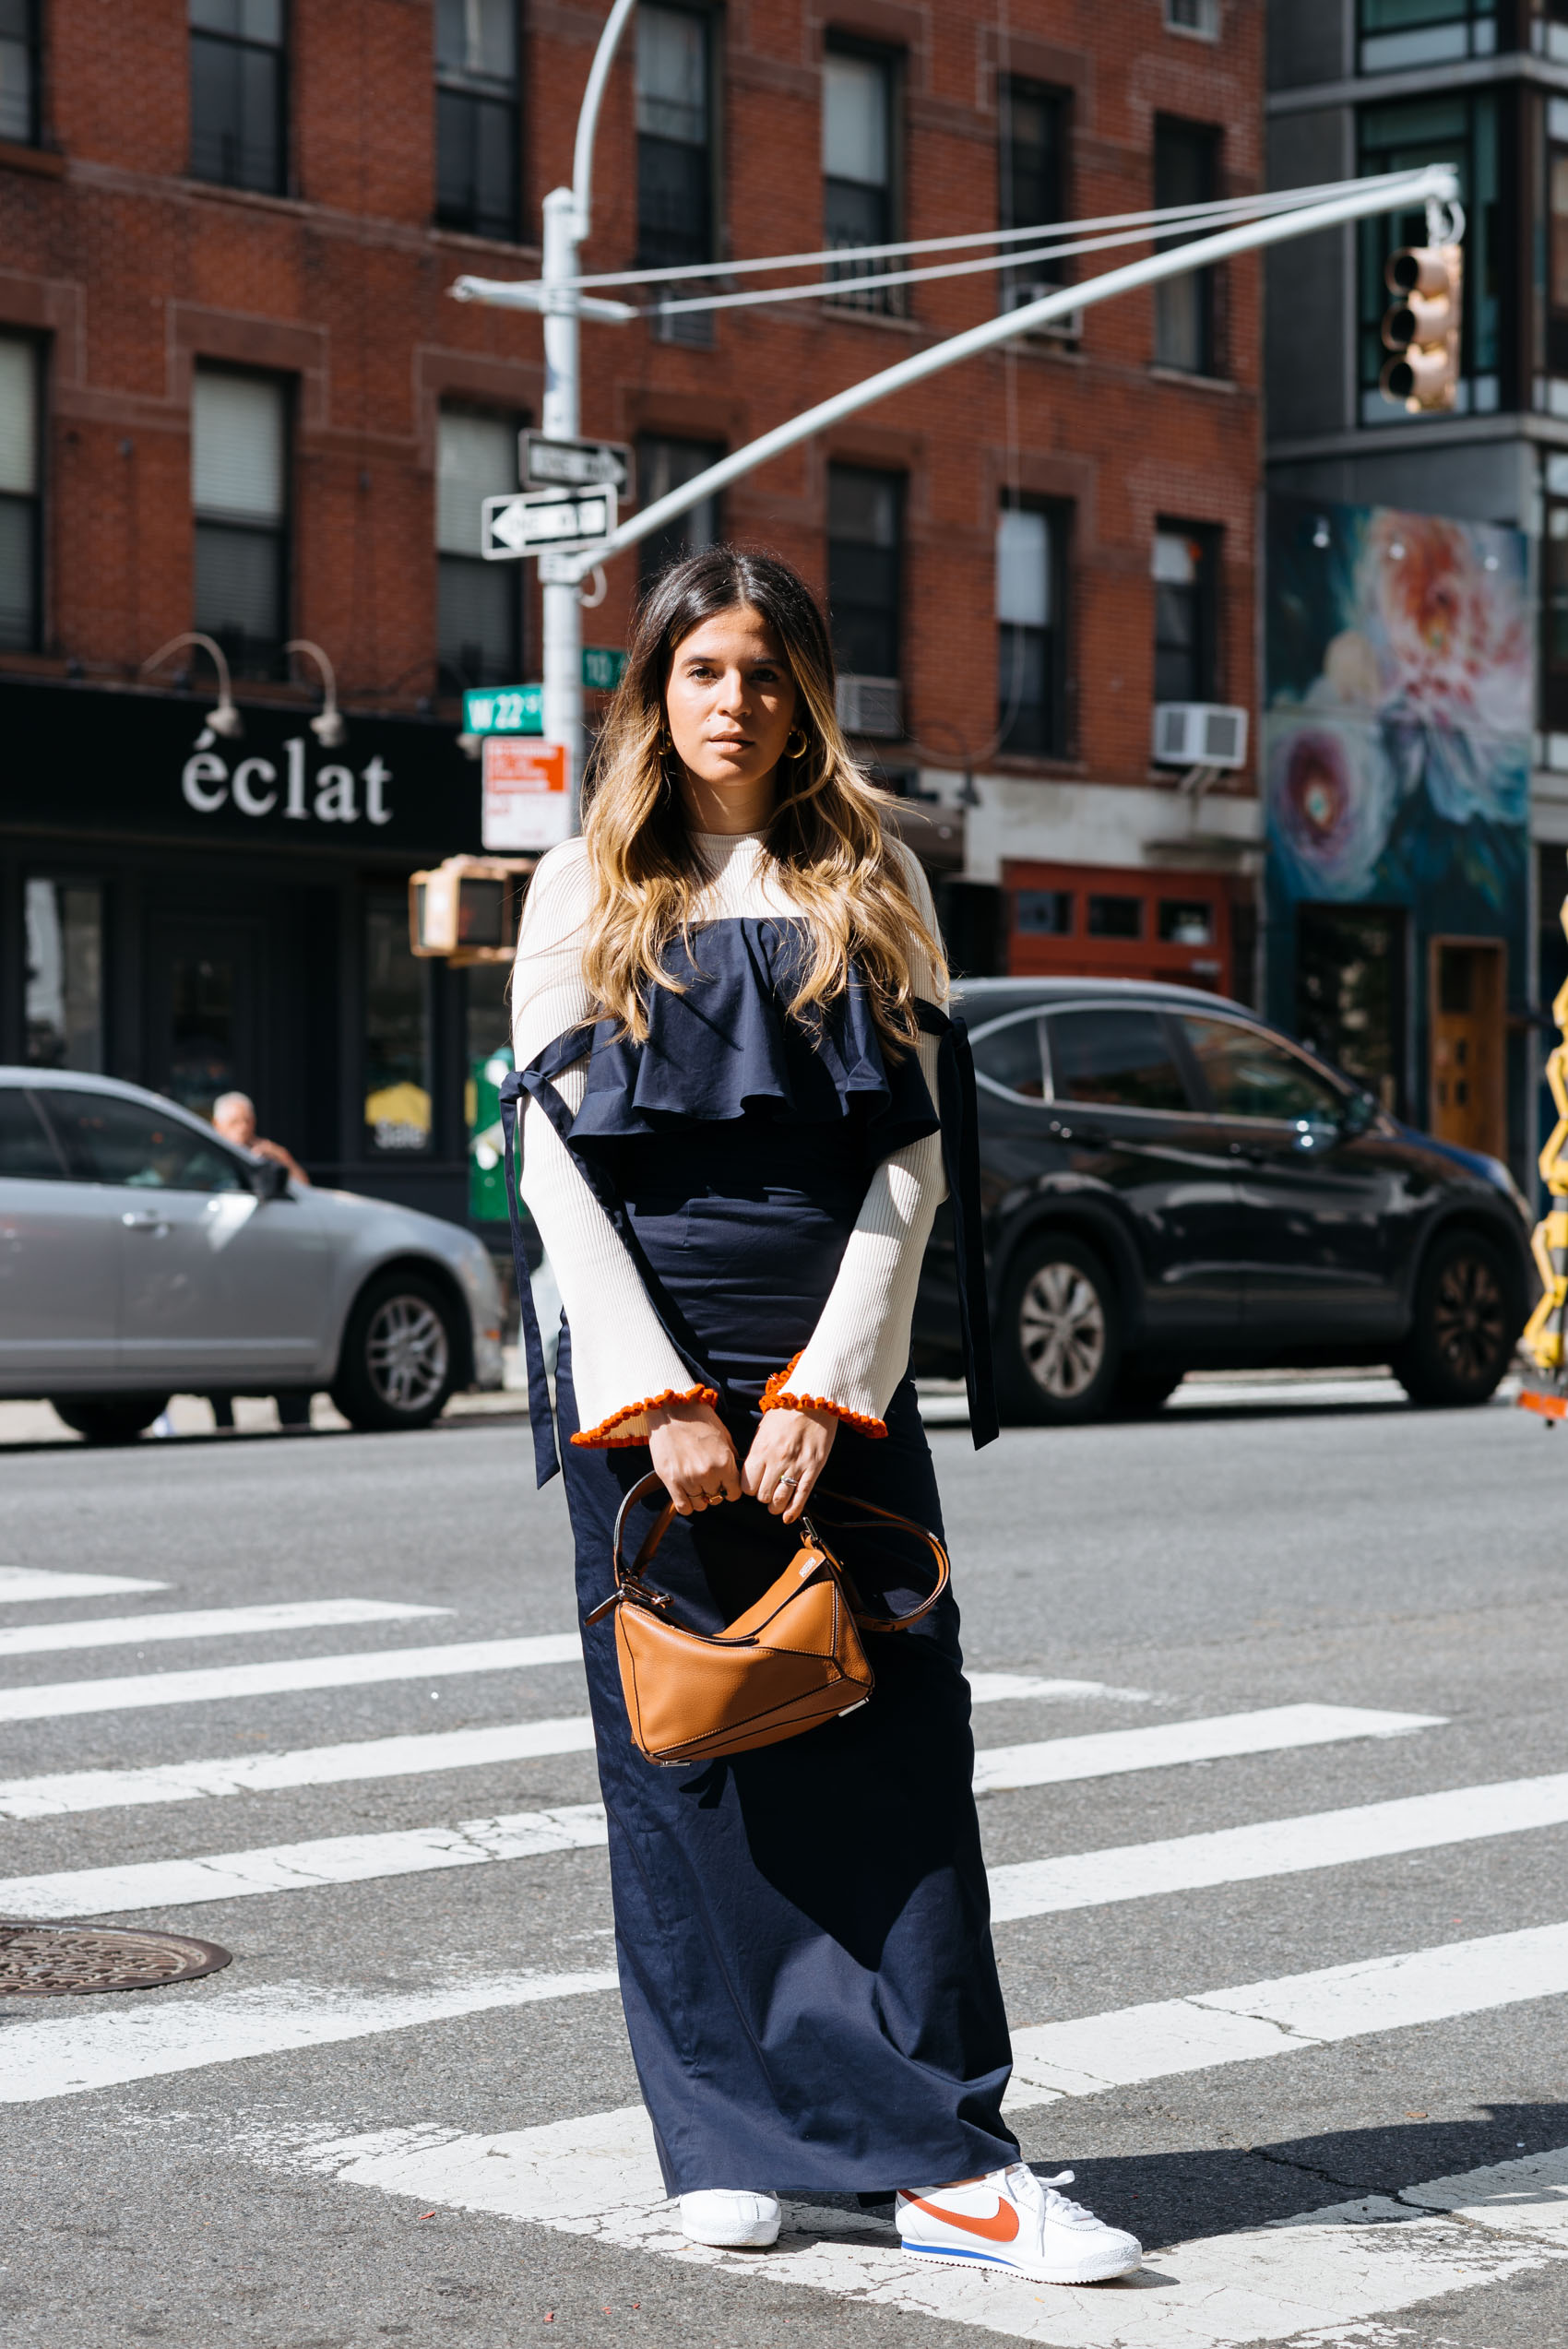 Maristella wears a column dress in an unexpected way for Fall